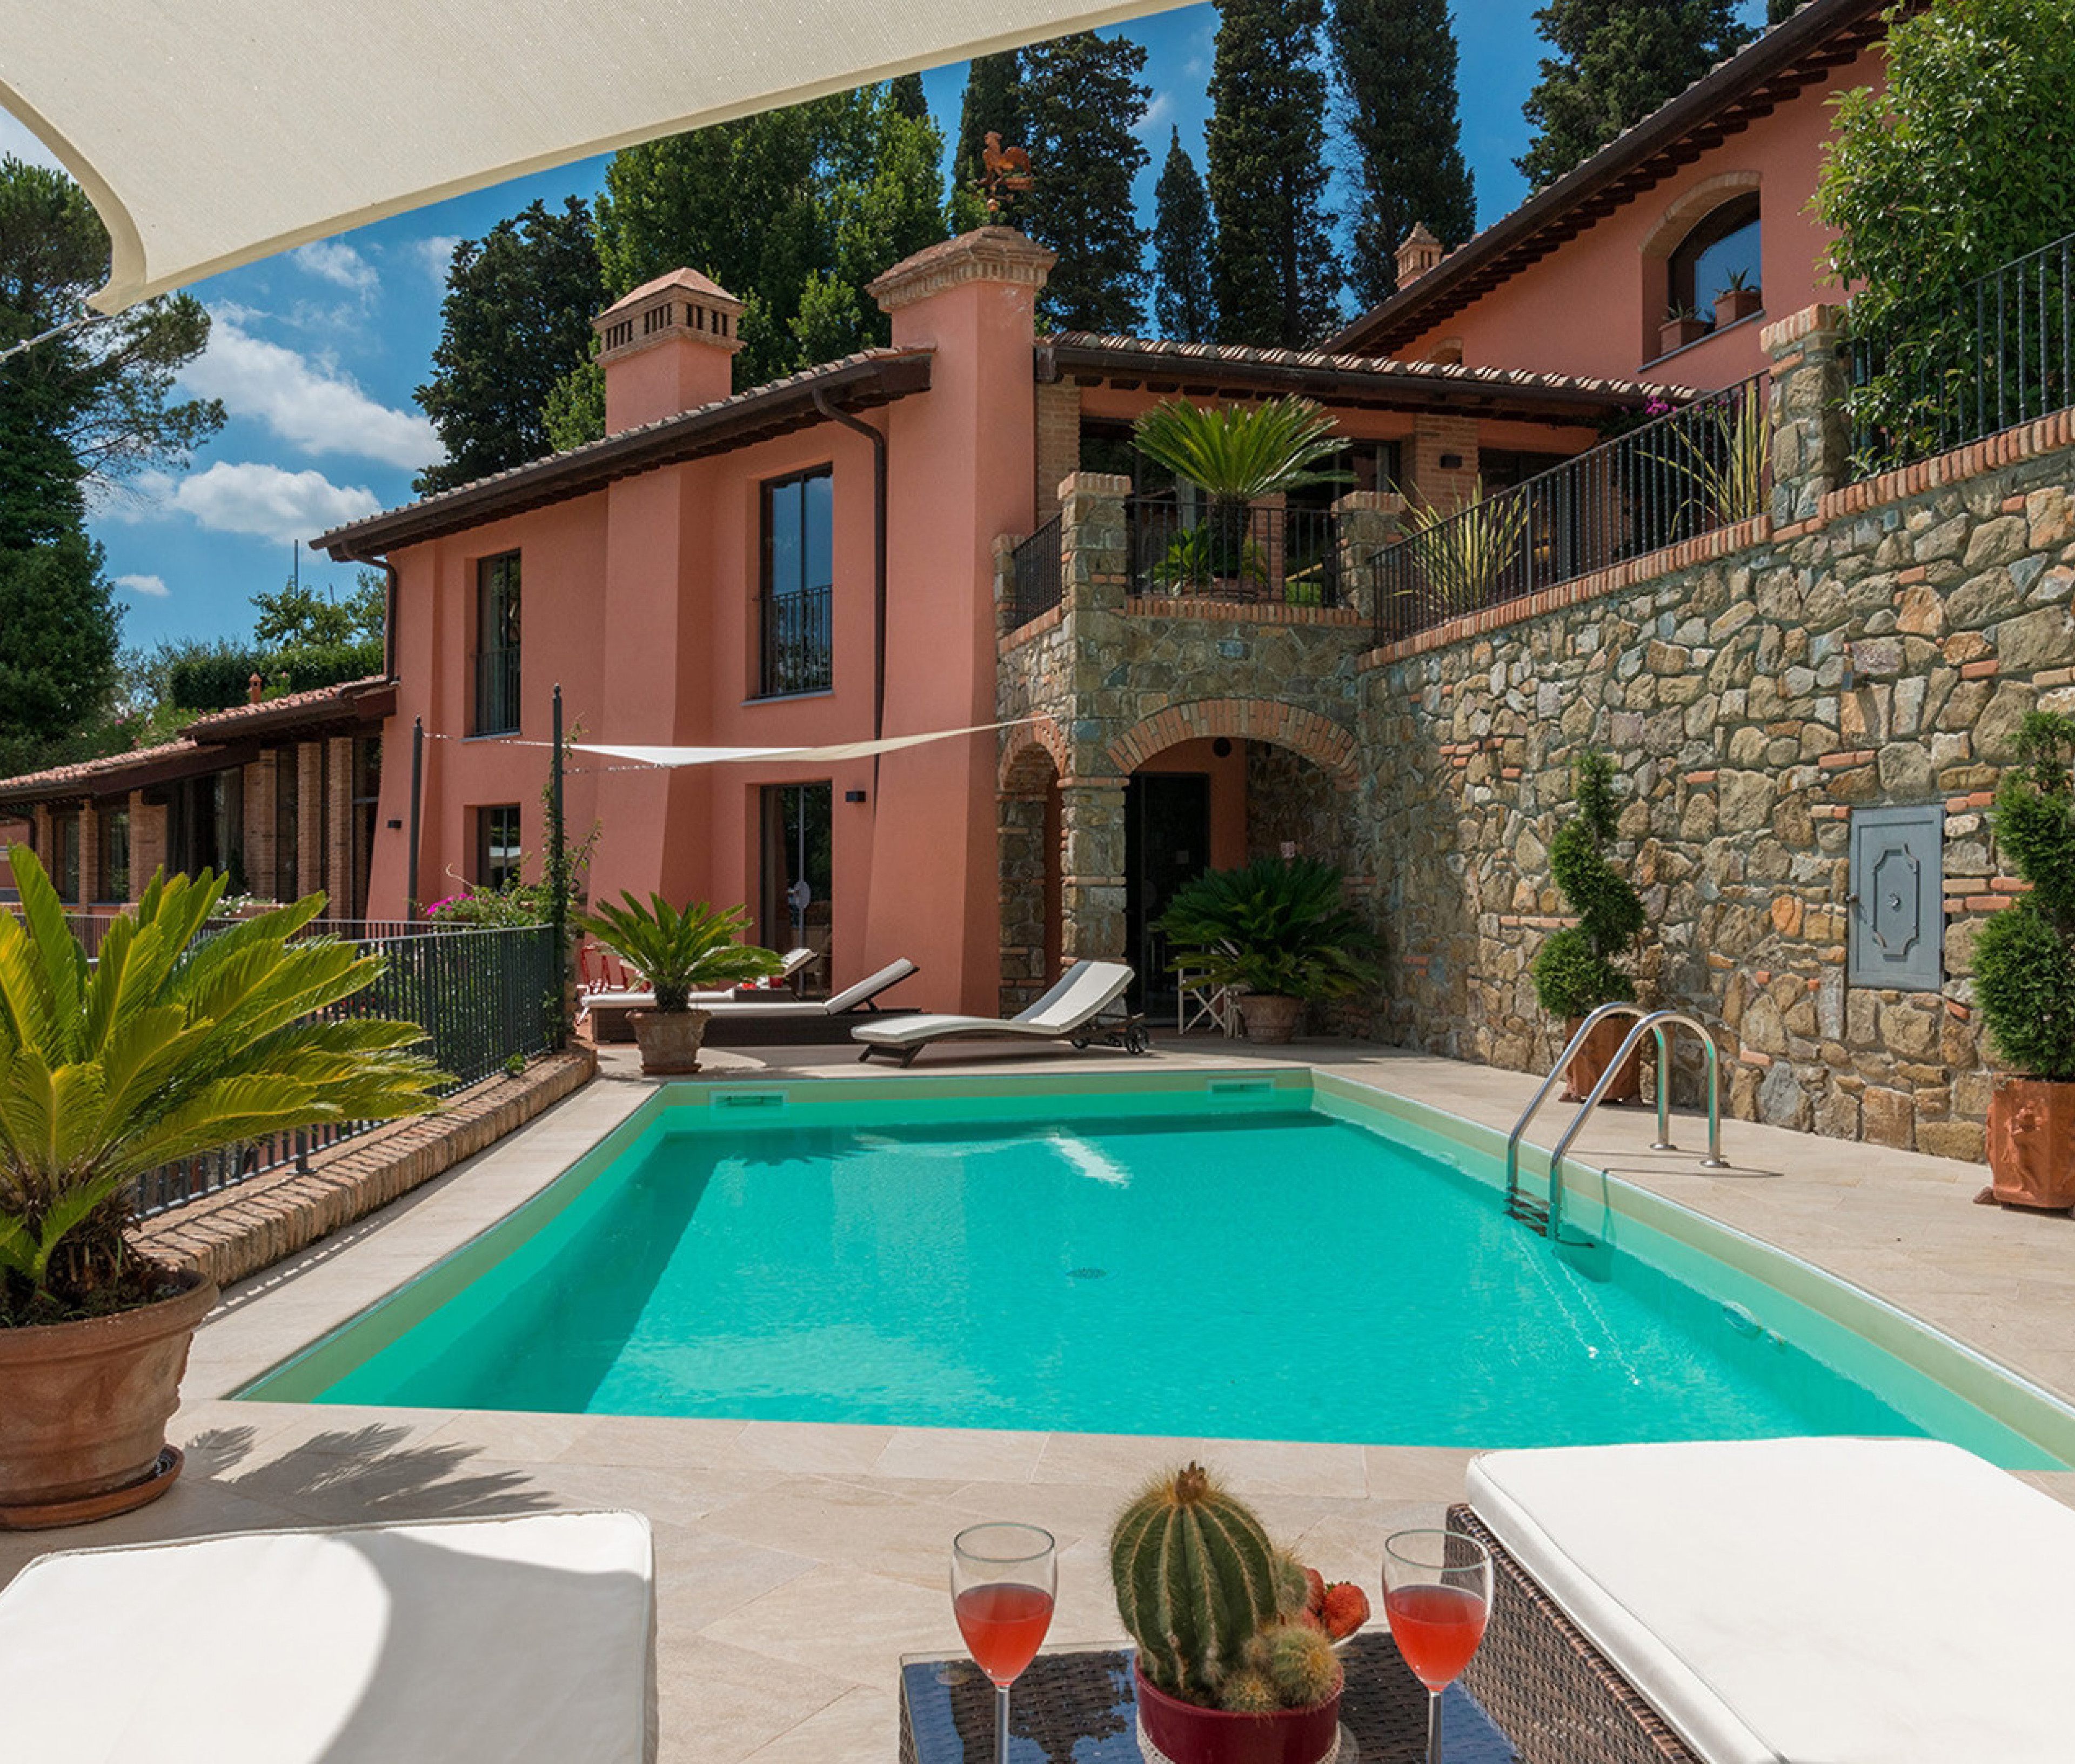 Le Panteraie - villas in Tuscany with pools